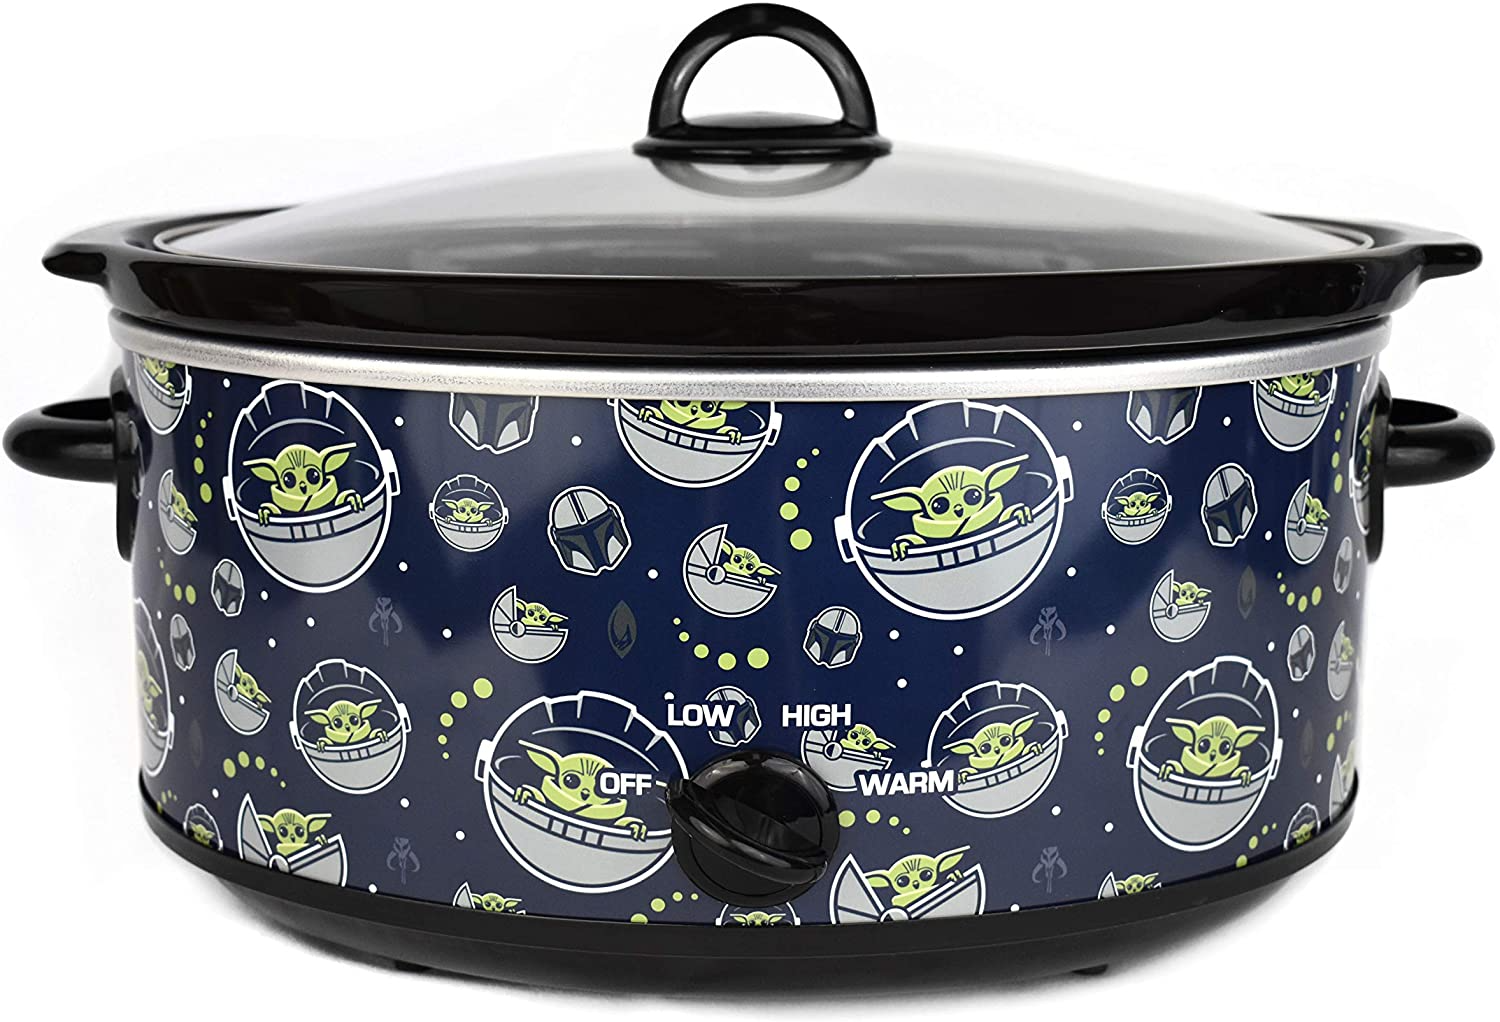 There's a Mandalorian Crock Pot & It Has The Child, Of Course